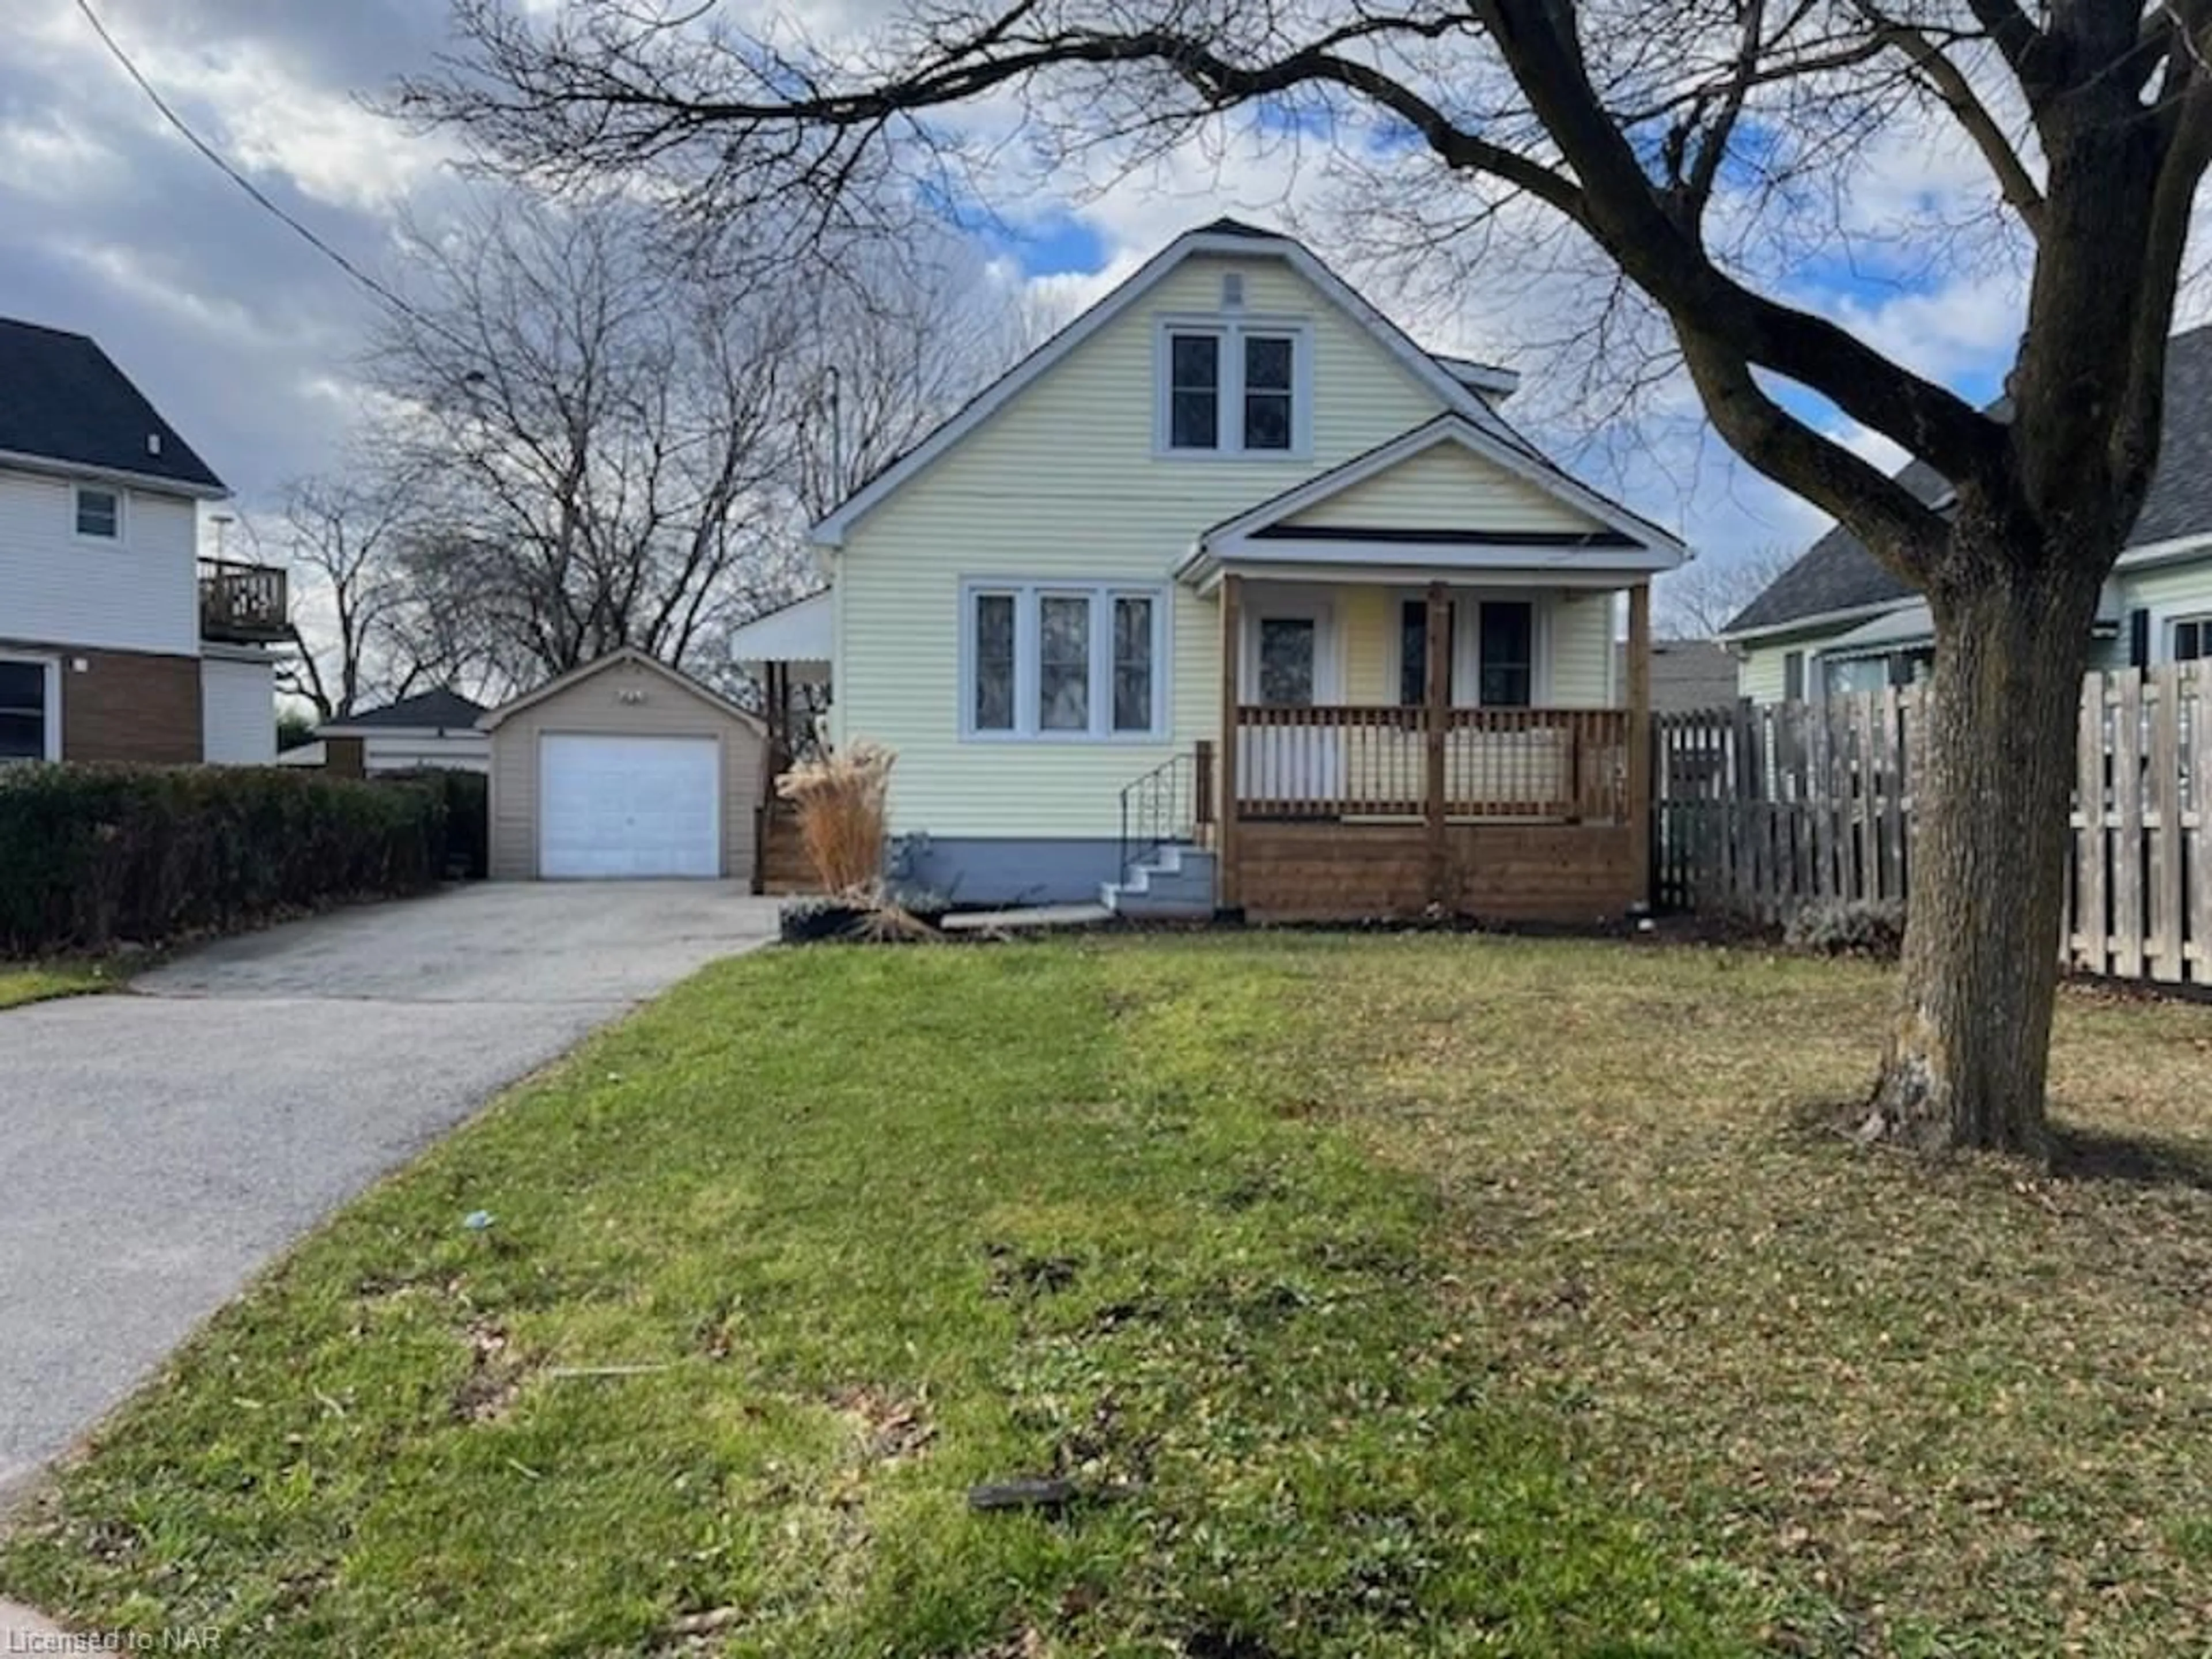 Frontside or backside of a home for 267 Niagara St, St. Catharines Ontario L2M 5N2